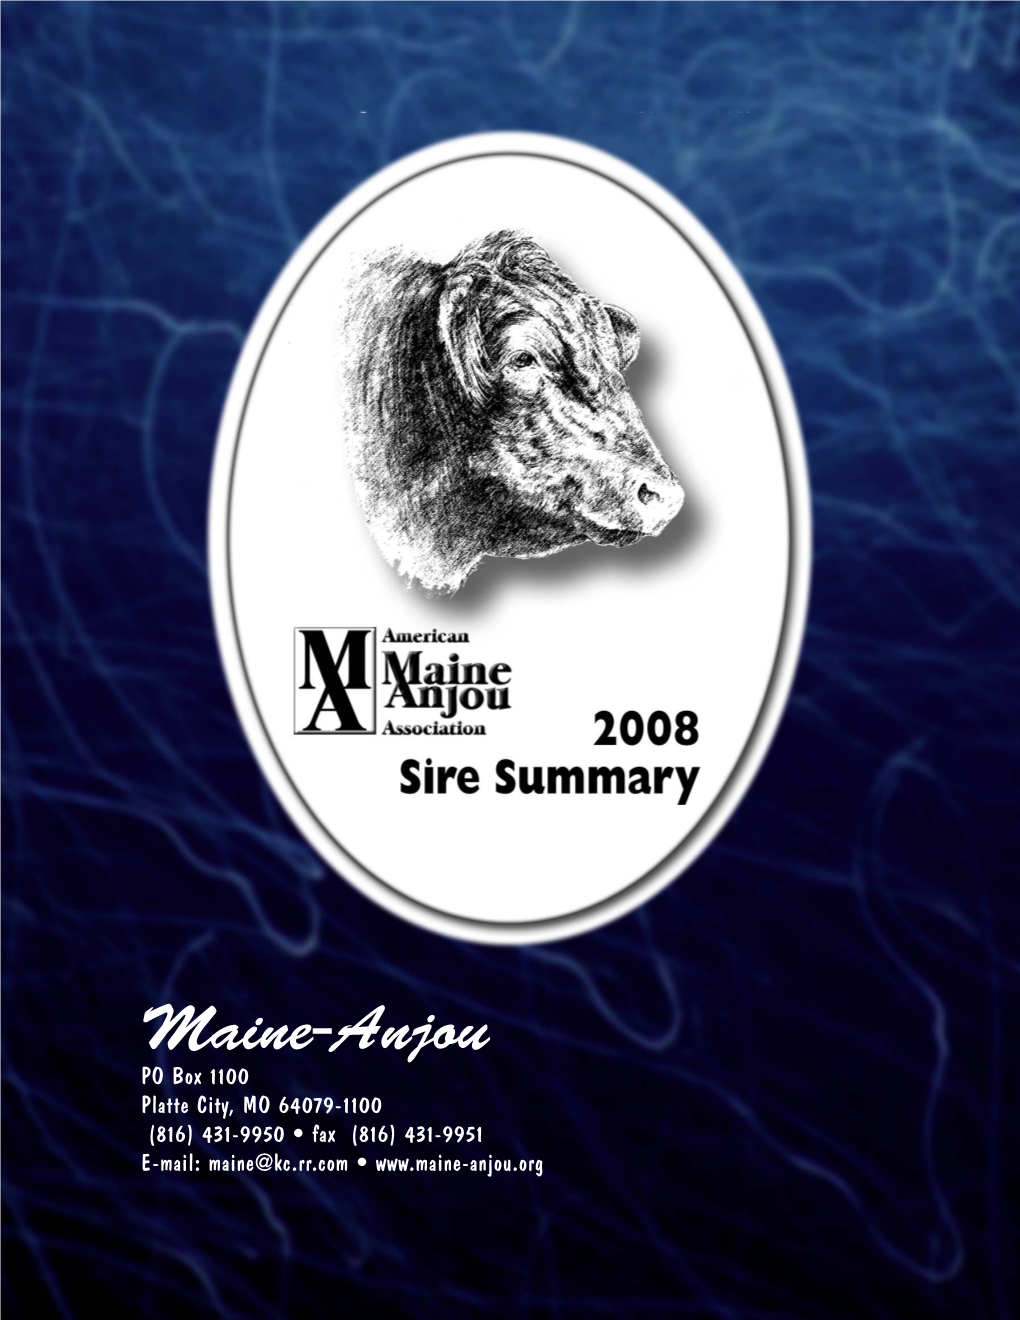 The Official Spring 2008 Sire Summary